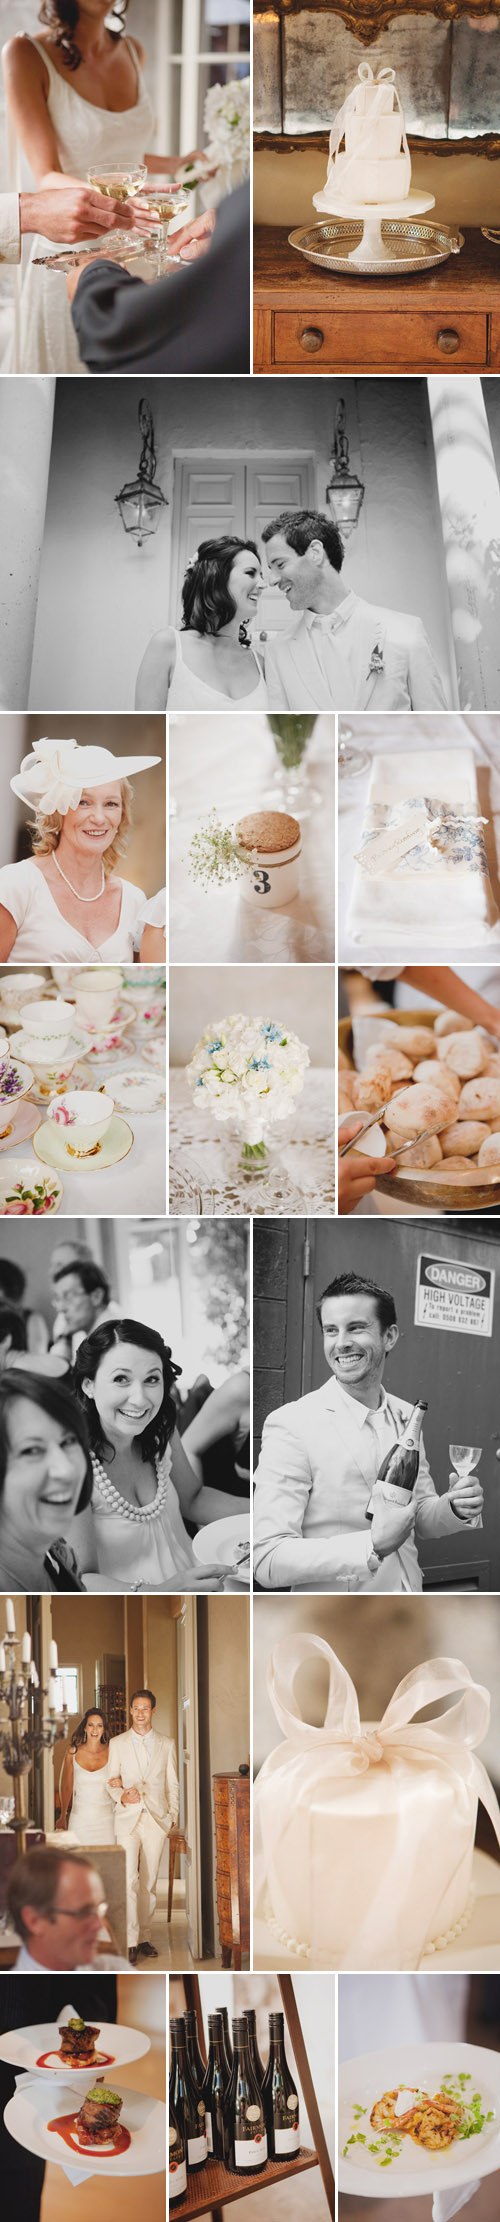 elegant vintage chic real wedding, Auckland, New Zealand, images by Kate McPherson